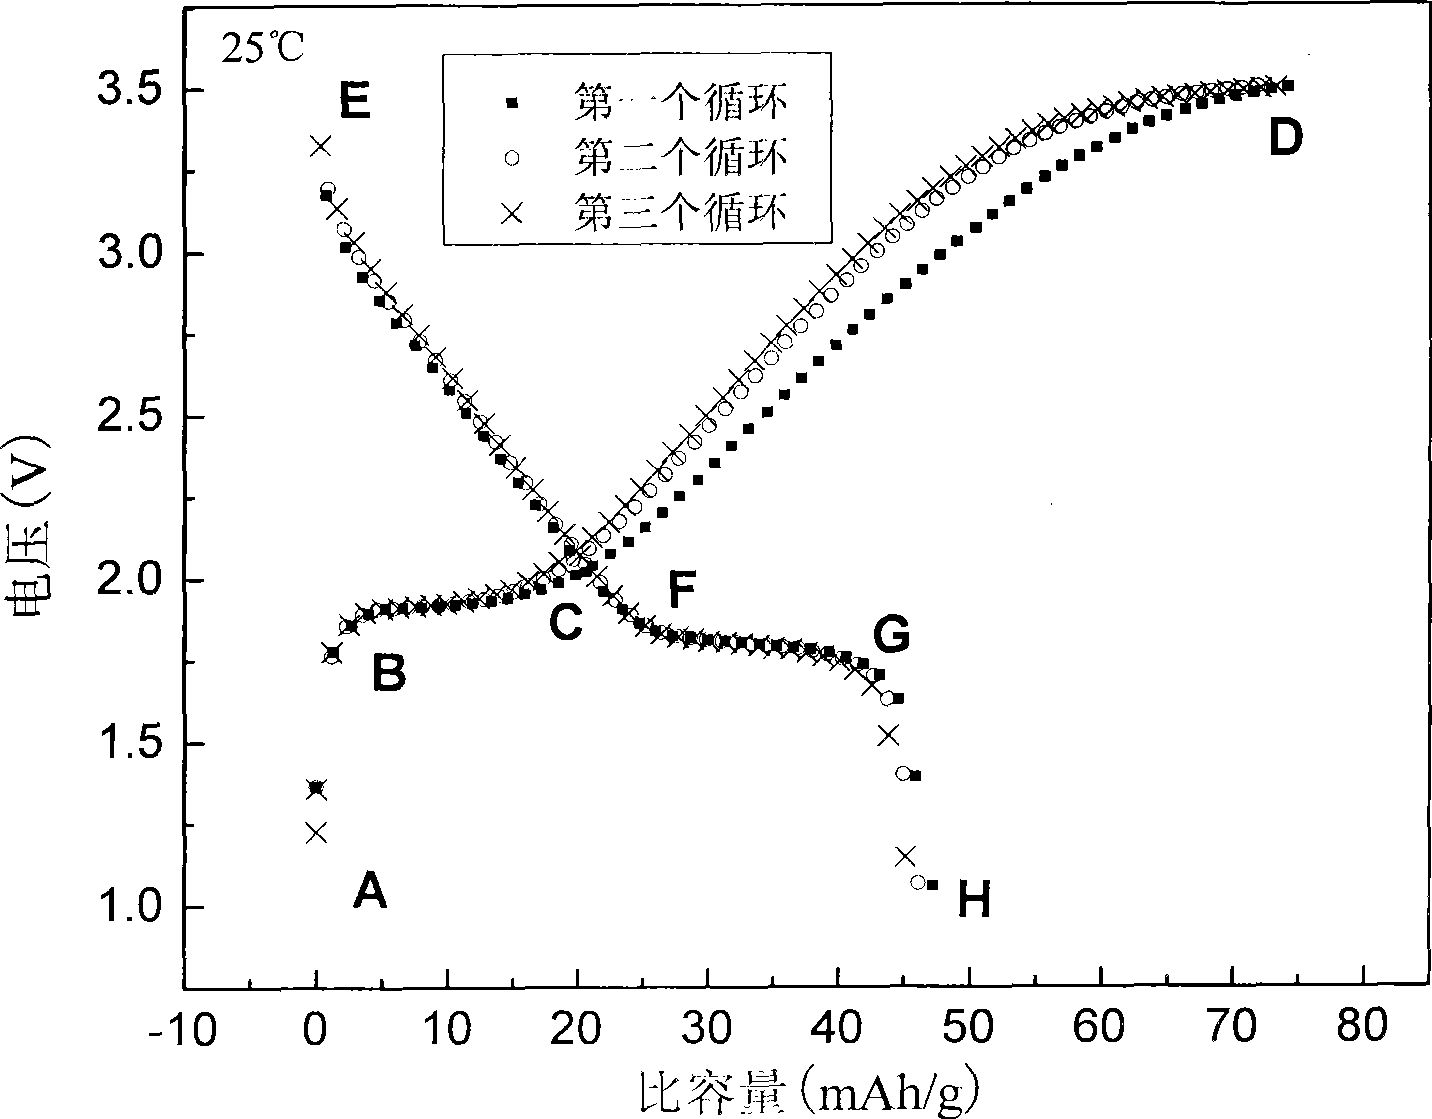 Asymmetric lithium iron phosphate cell using lithium titanate as main active substance of negative pole